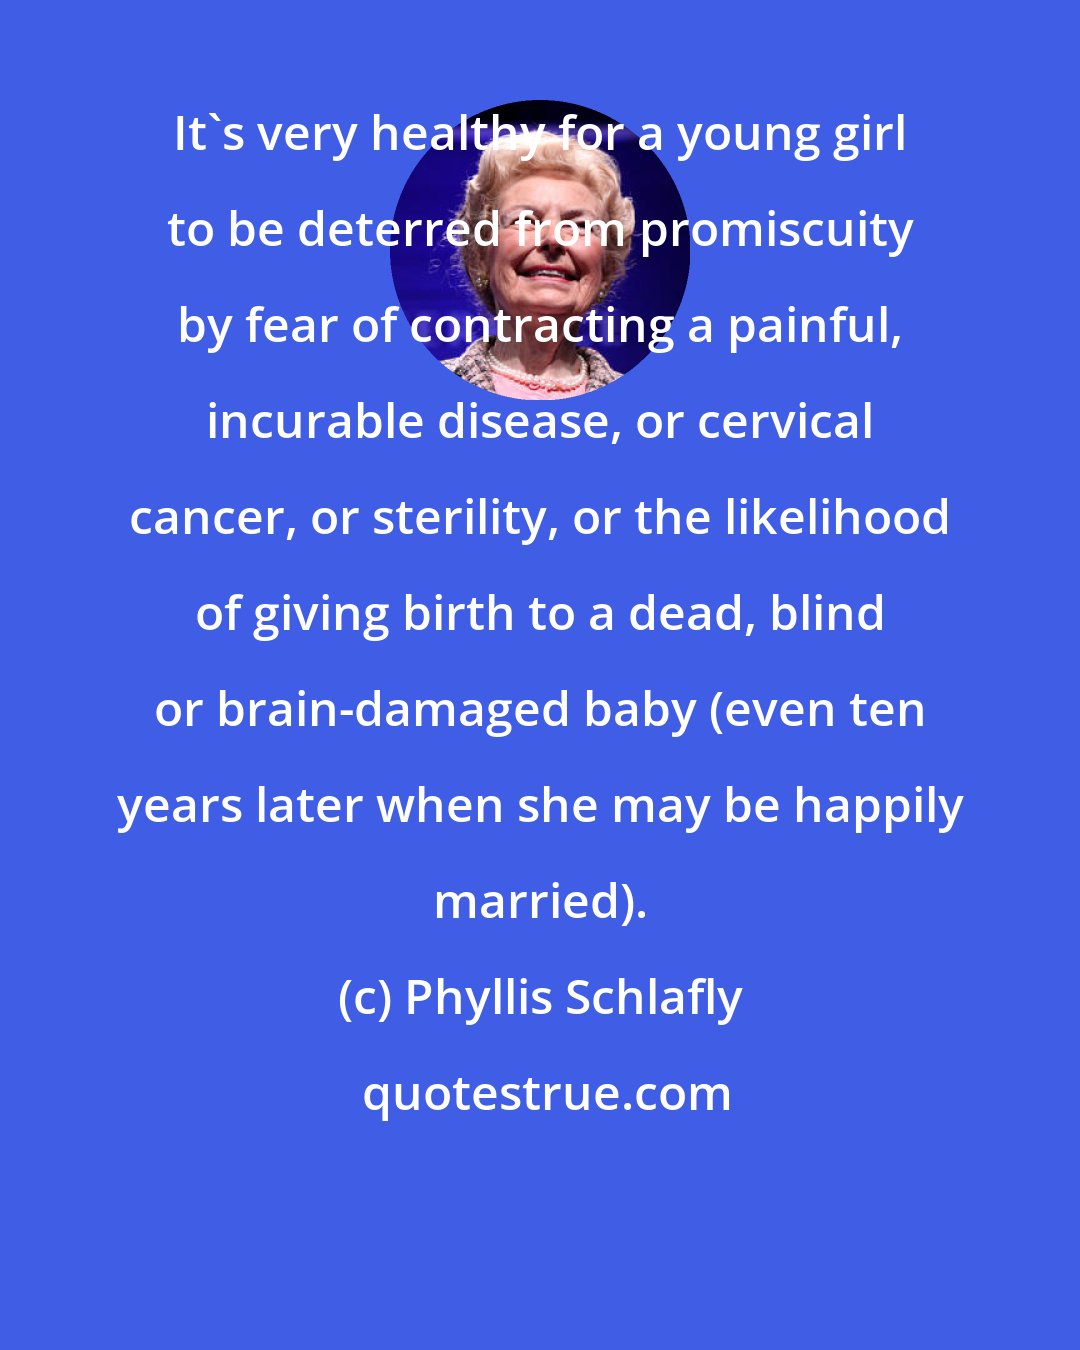 Phyllis Schlafly: It's very healthy for a young girl to be deterred from promiscuity by fear of contracting a painful, incurable disease, or cervical cancer, or sterility, or the likelihood of giving birth to a dead, blind or brain-damaged baby (even ten years later when she may be happily married).